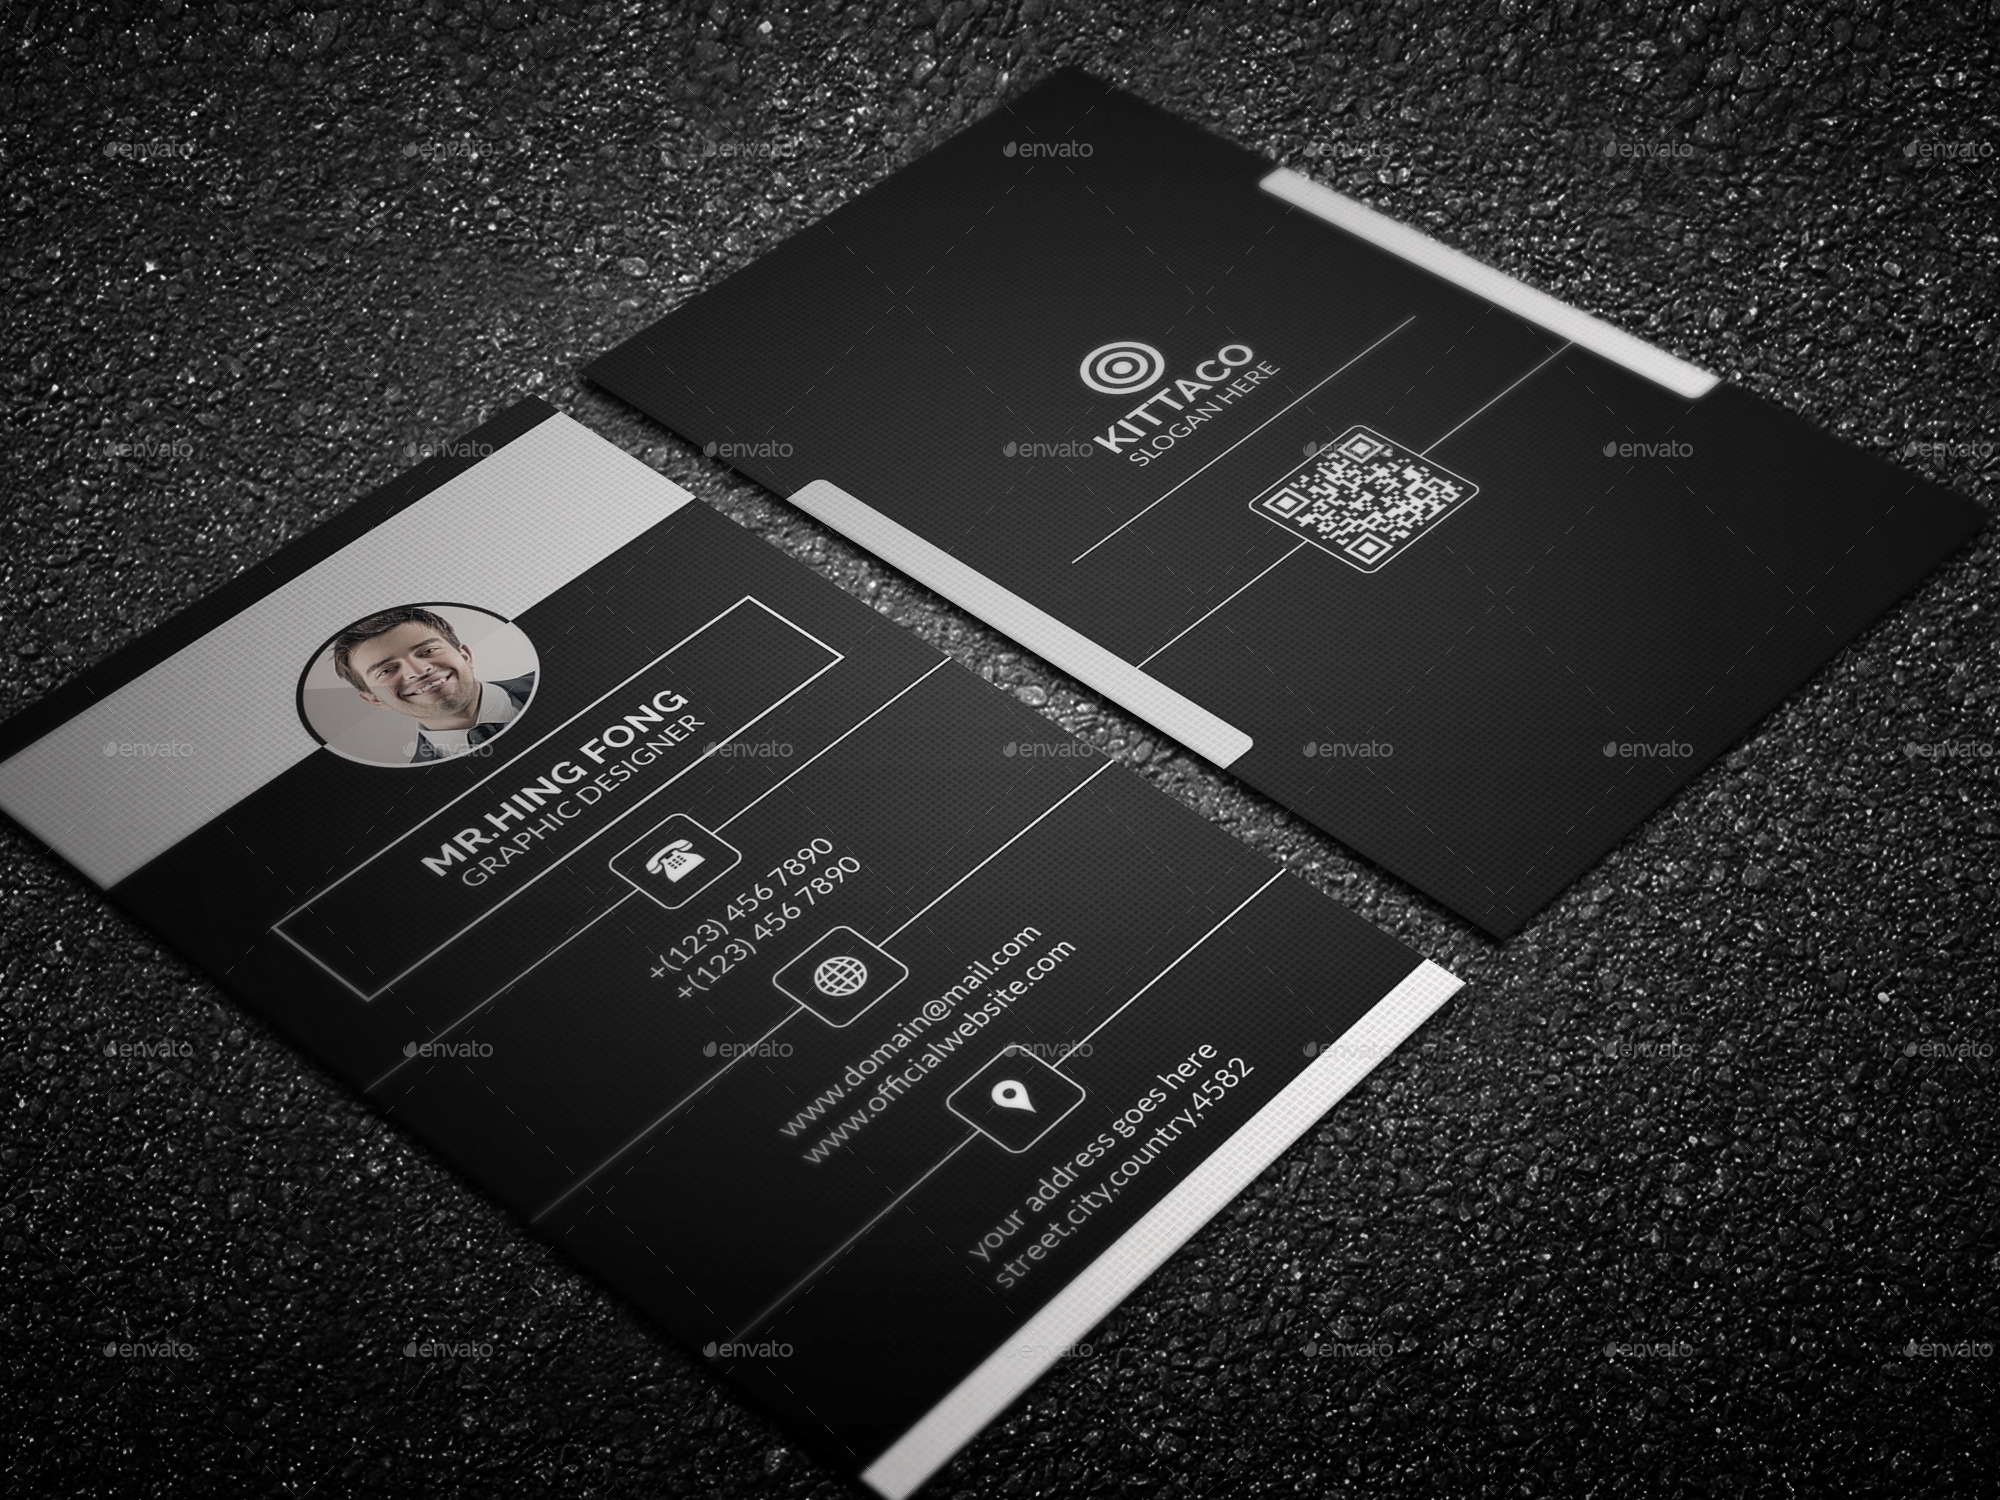 Digital Business Card Template By Kittaco | Graphicriver regarding Google Search Business Card Template